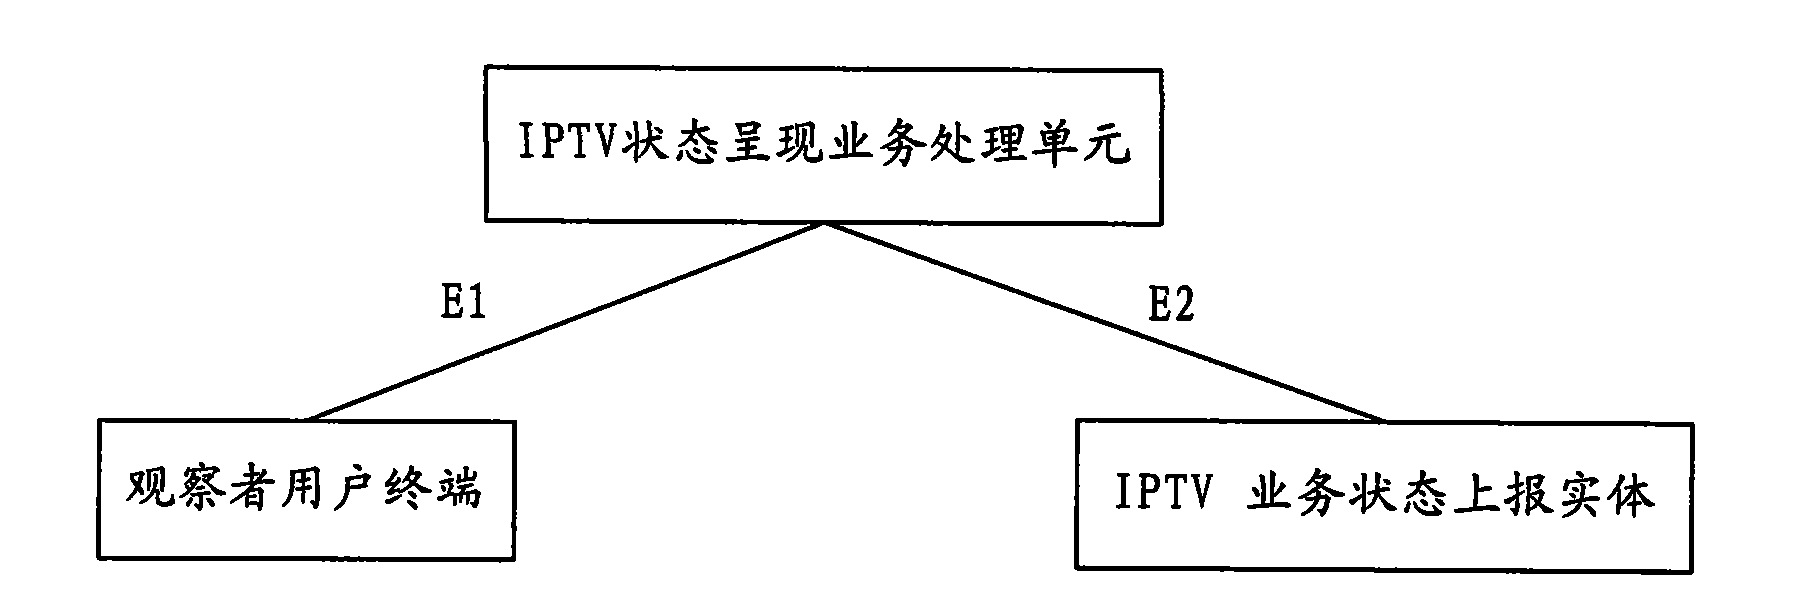 Method for displaying and sending service status information, user terminal equipment and service processing unit